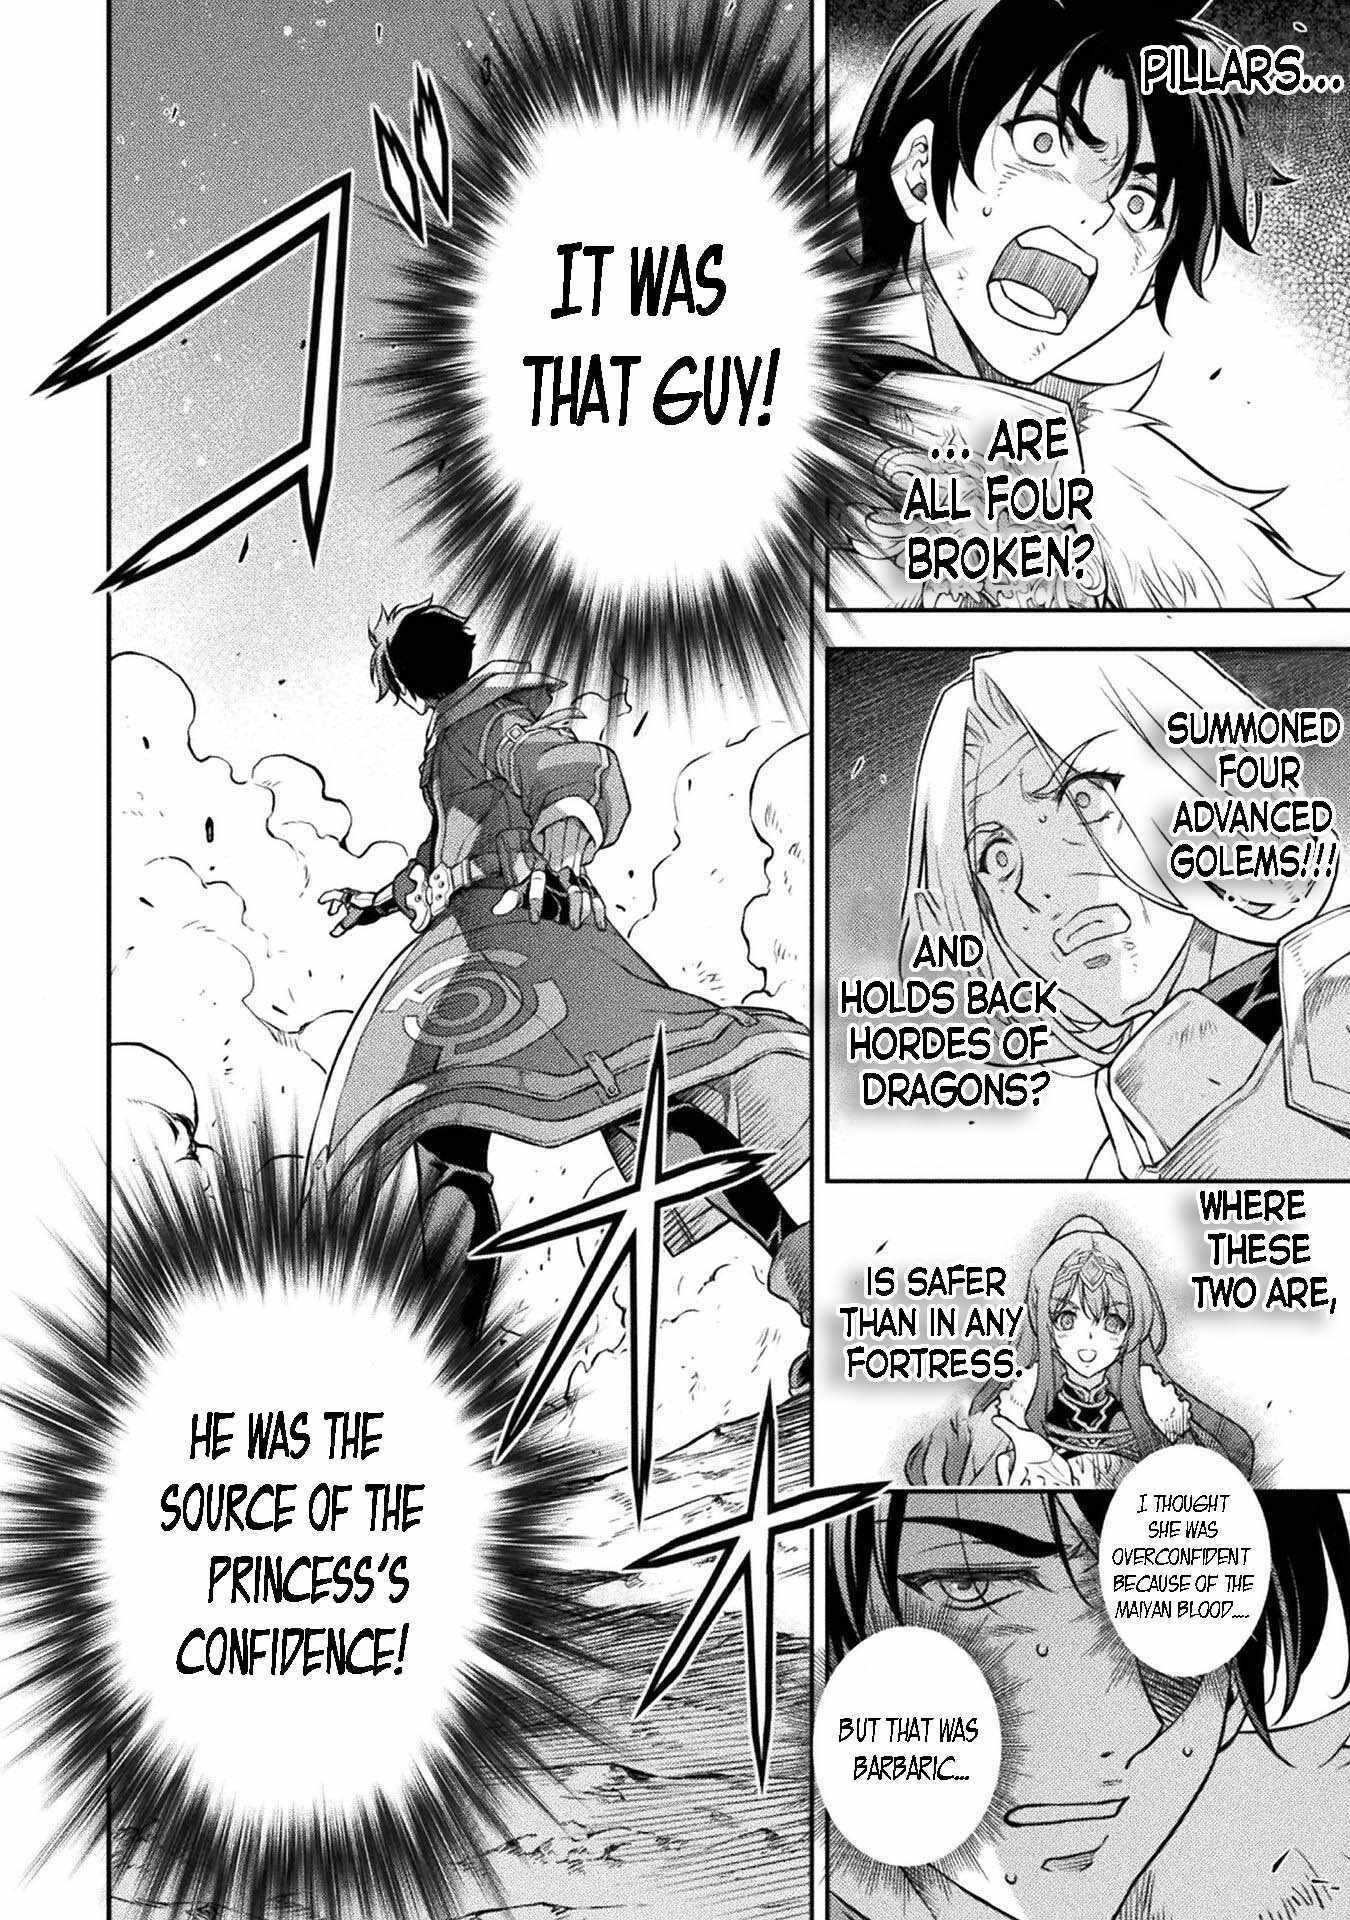 Drawing: The Greatest Mangaka Becomes A Skilled “Martial Artist” In Another World - Page 2